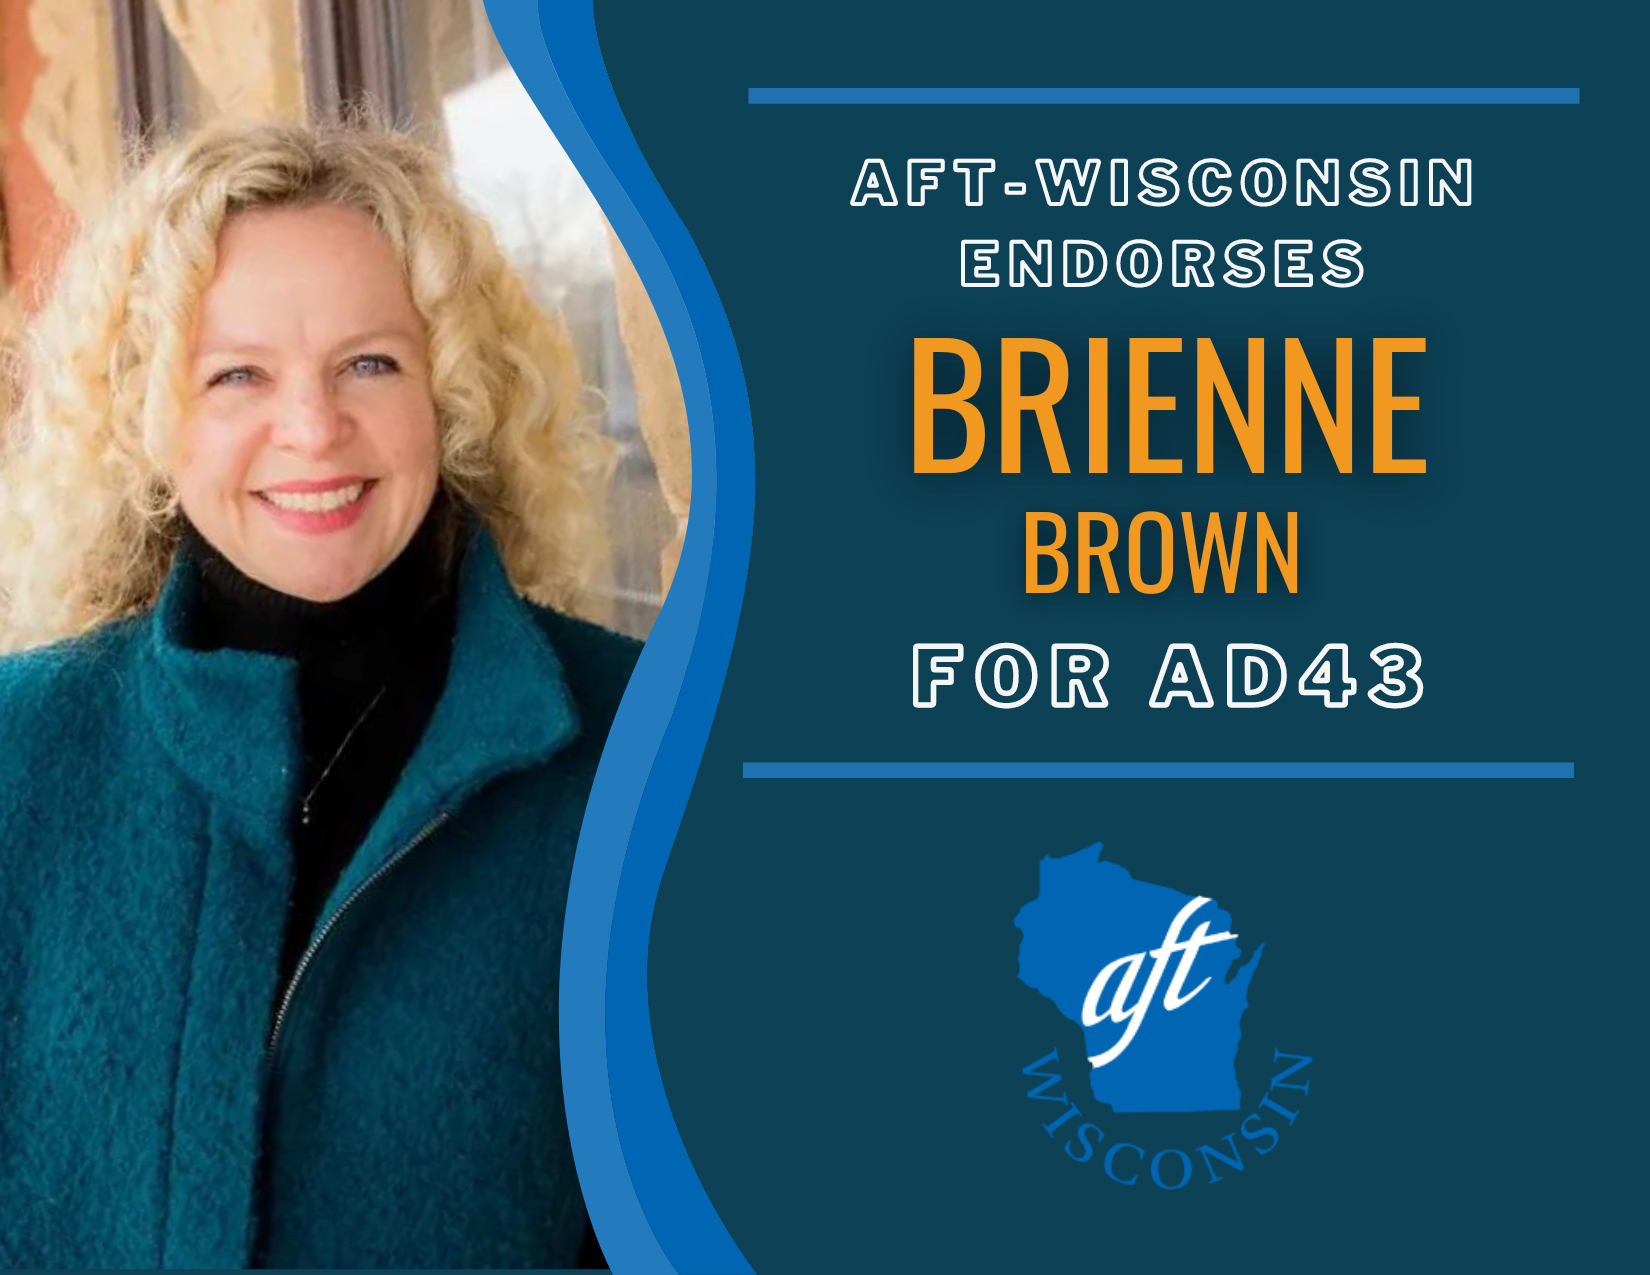 Brienne Brown for AD43